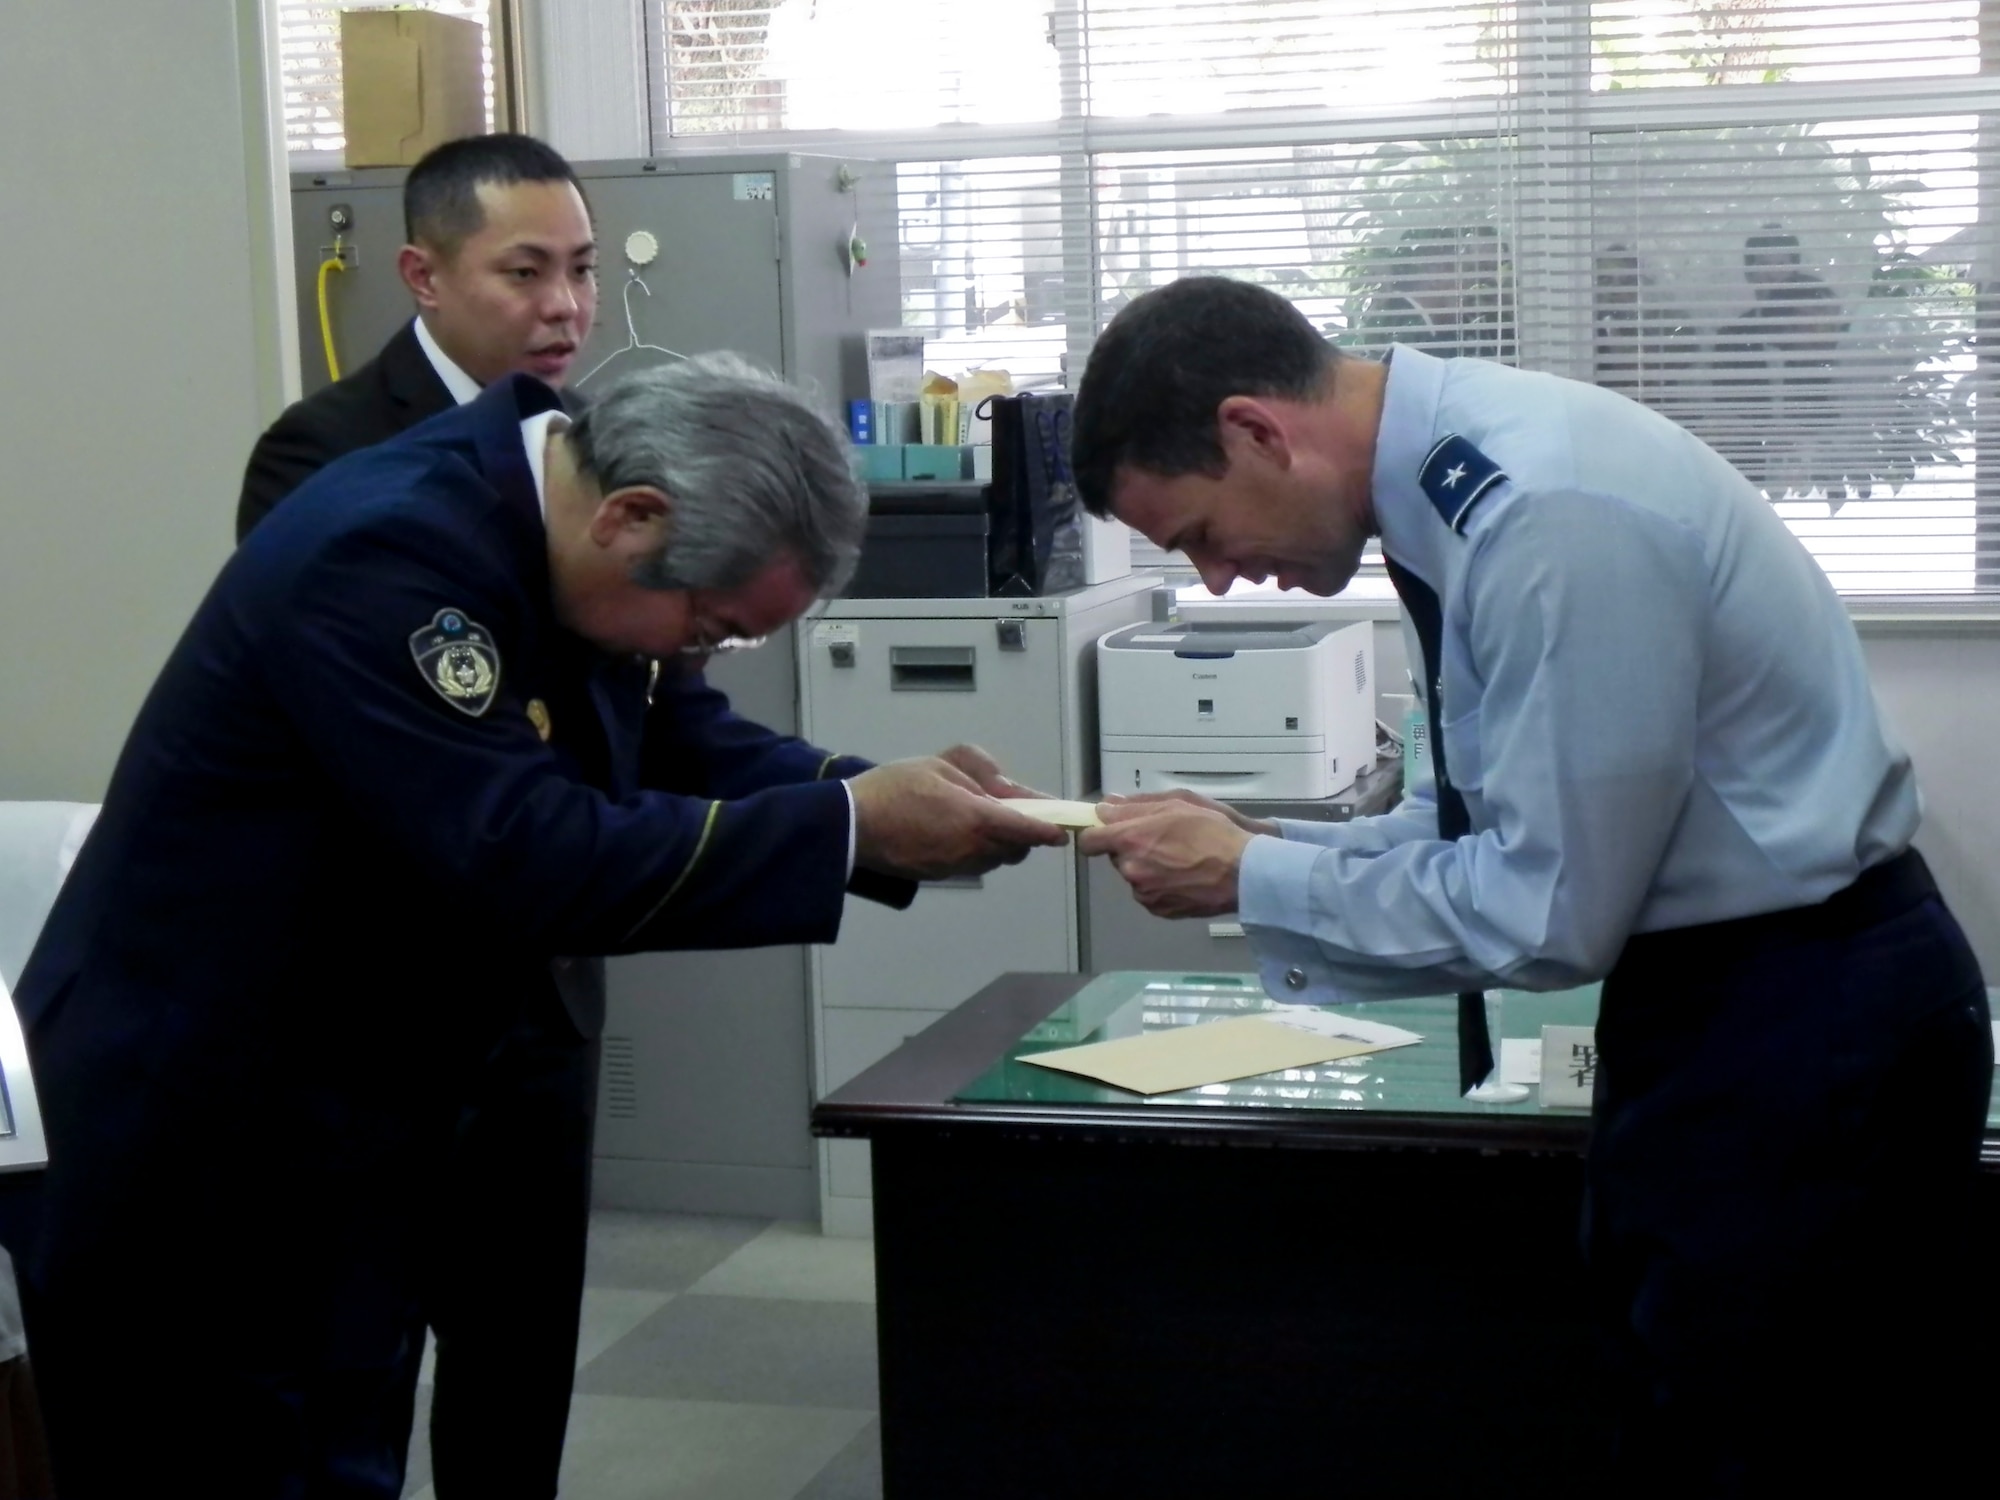 Brig Gen Matt Molloy, 18th Wing commander, presents a certificate of appreciation and a wing coin to Kiyomasa Yasumura, Chief of the Okinawa Police Station during a visit to the station on March 21. The certificate read, “In appreciation for your outstanding service and cooperation in law enforcement and force protection matters important to Kadena Air Force Base and the lovely people of Okinawa. Your efforts ensured the safety and security of our communities, bringing great honor to the Japanese Police.”
(U.S. Air Force photo by Maj. Christopher Anderson/Released)